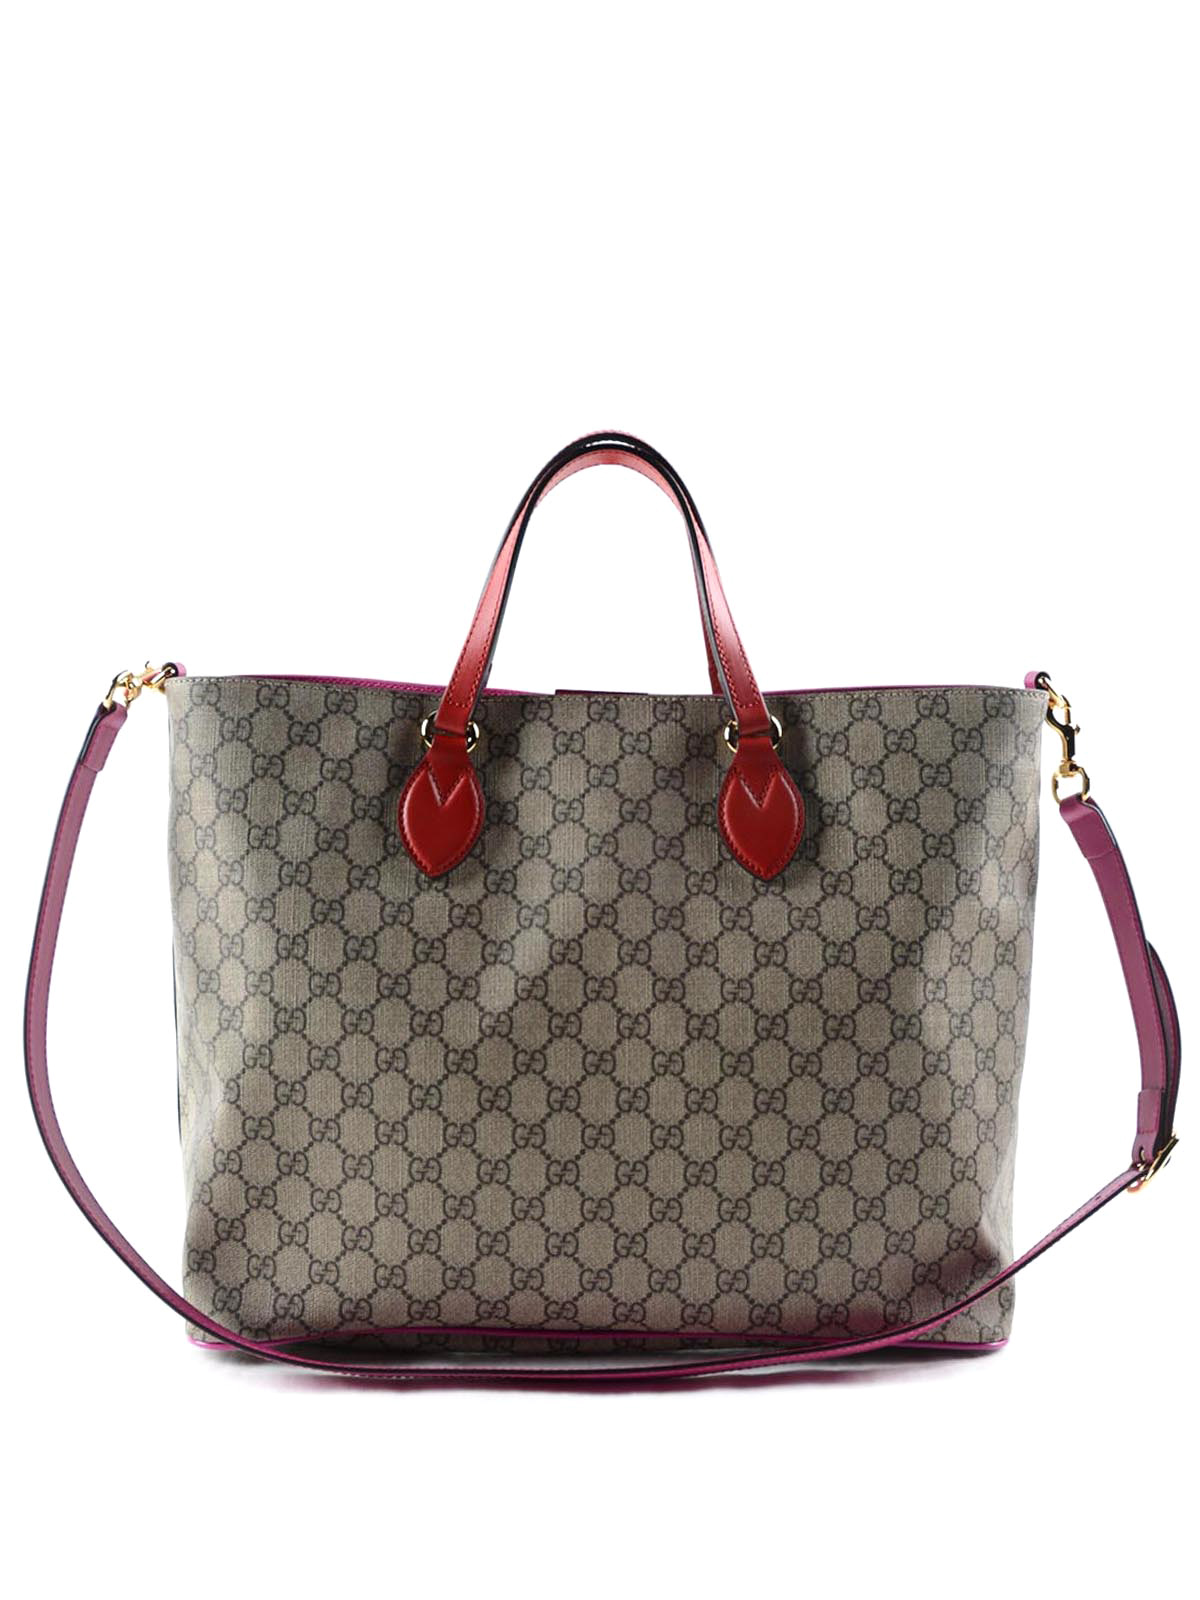 Gucci - Original GG and leather soft tote - totes bags - 453705 K5I3G 9784